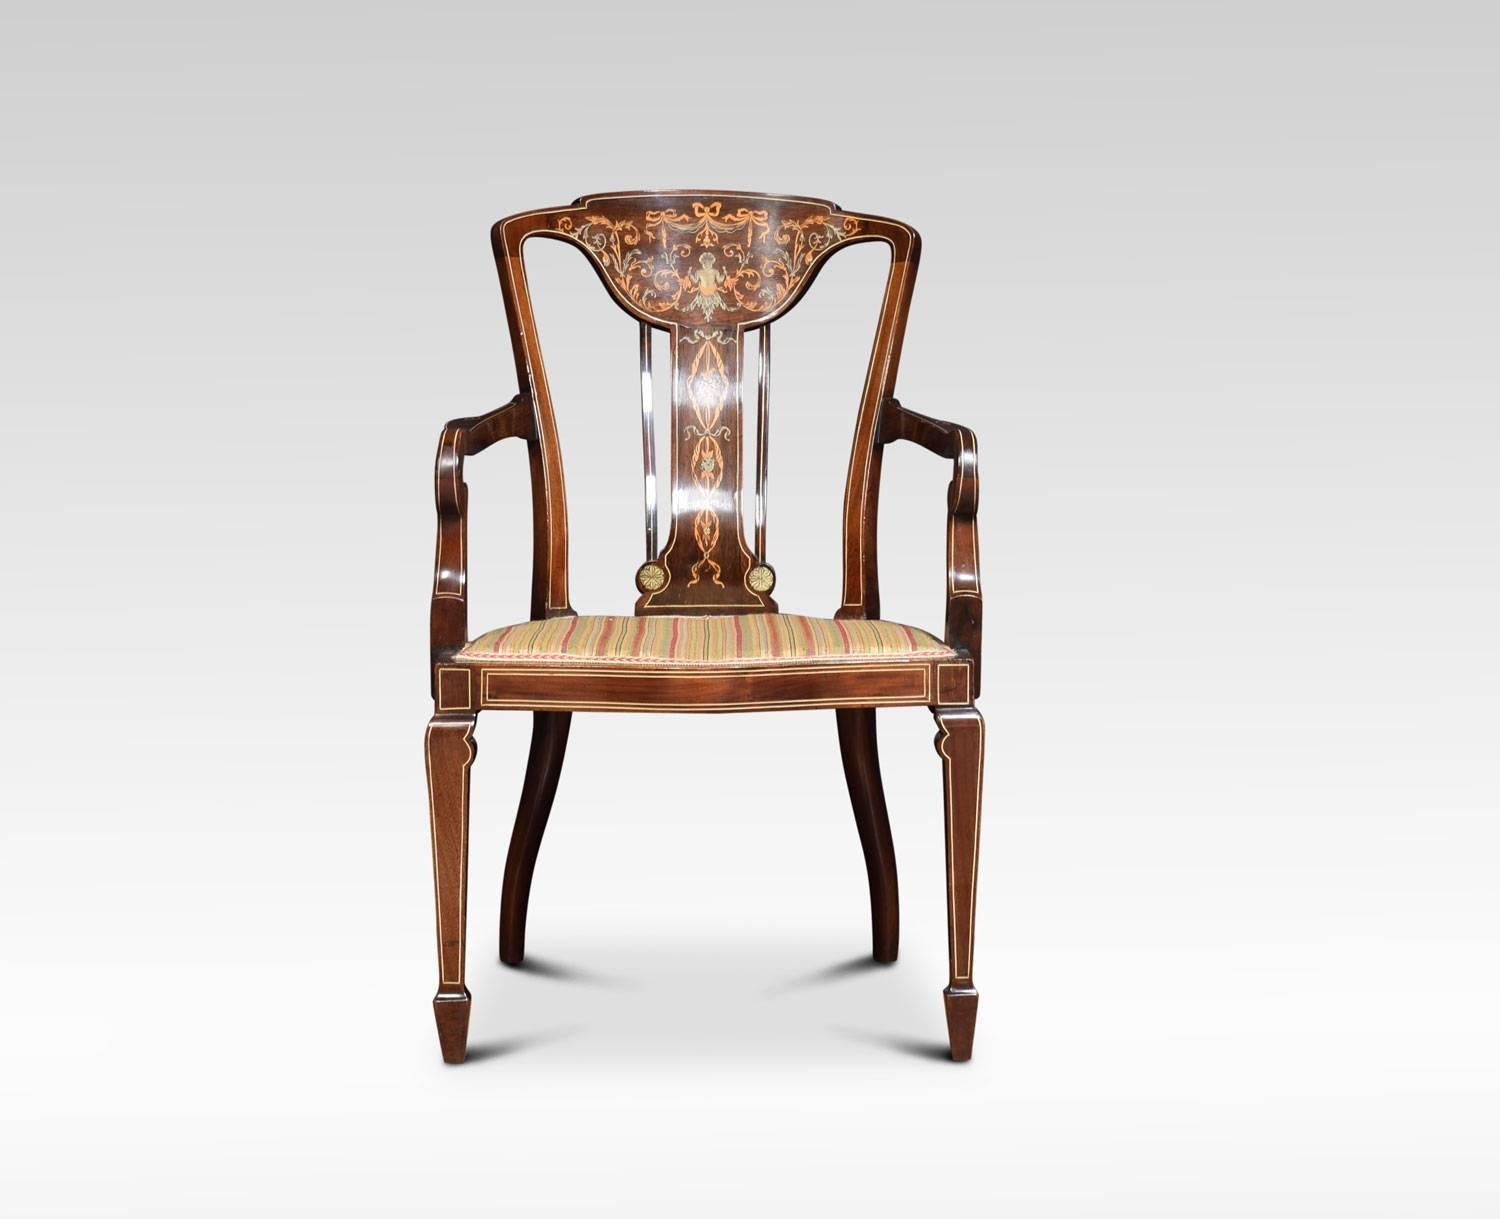 A pair of armchairs the shaped backs finely inlaid depicting scenes of figures holding garlands of flowers and ribbons with swags, to the upholstered seats flanked by out swept scrolling arms, supported on square tapering legs terminating in spade